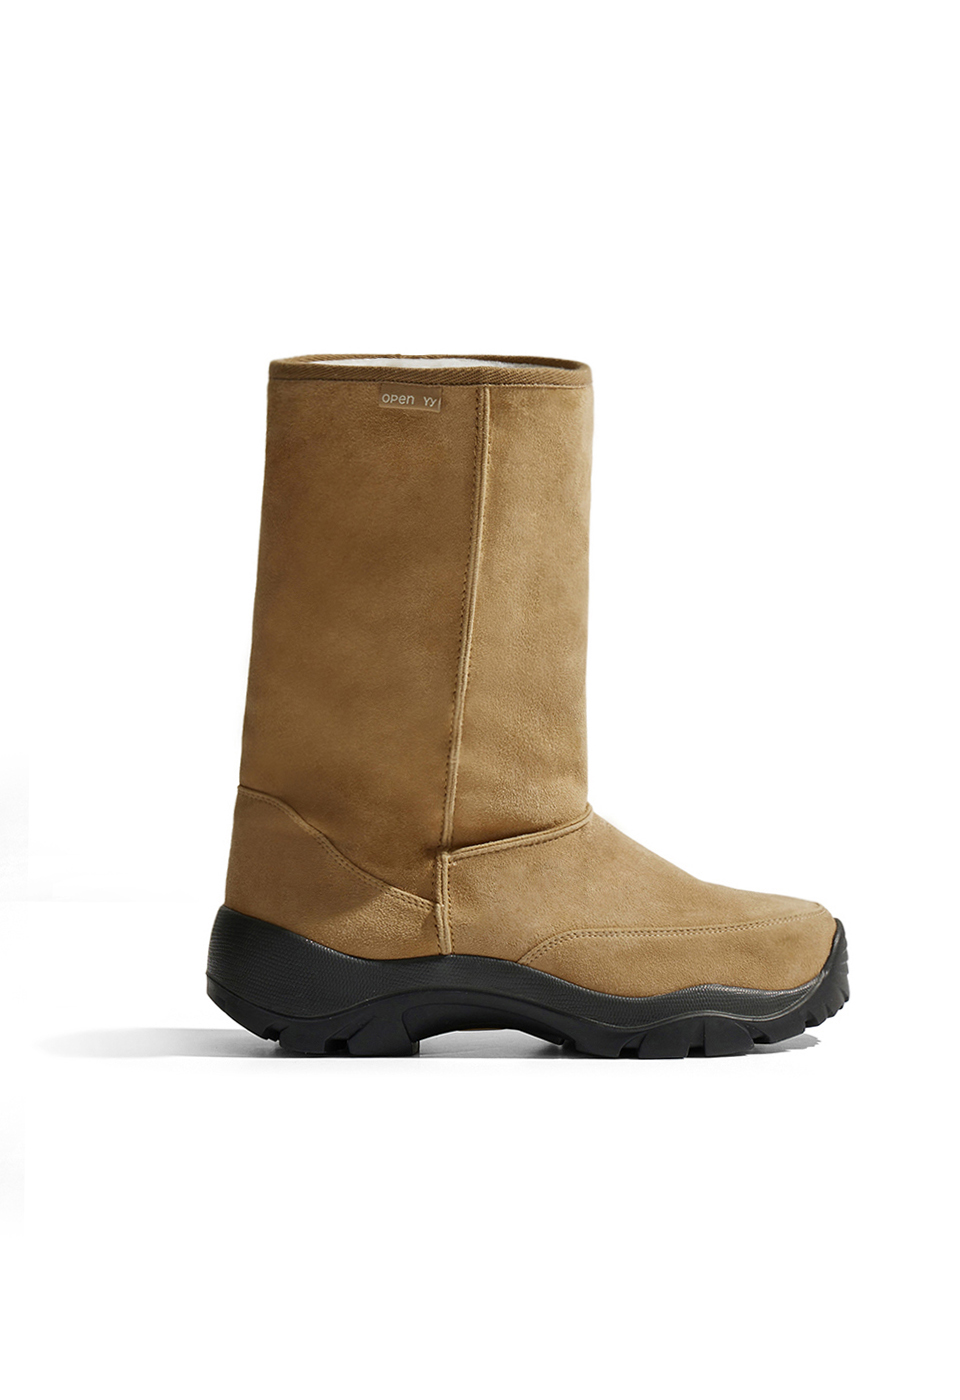 SUEDE MOUNTAIN BOOTS, BEIGE